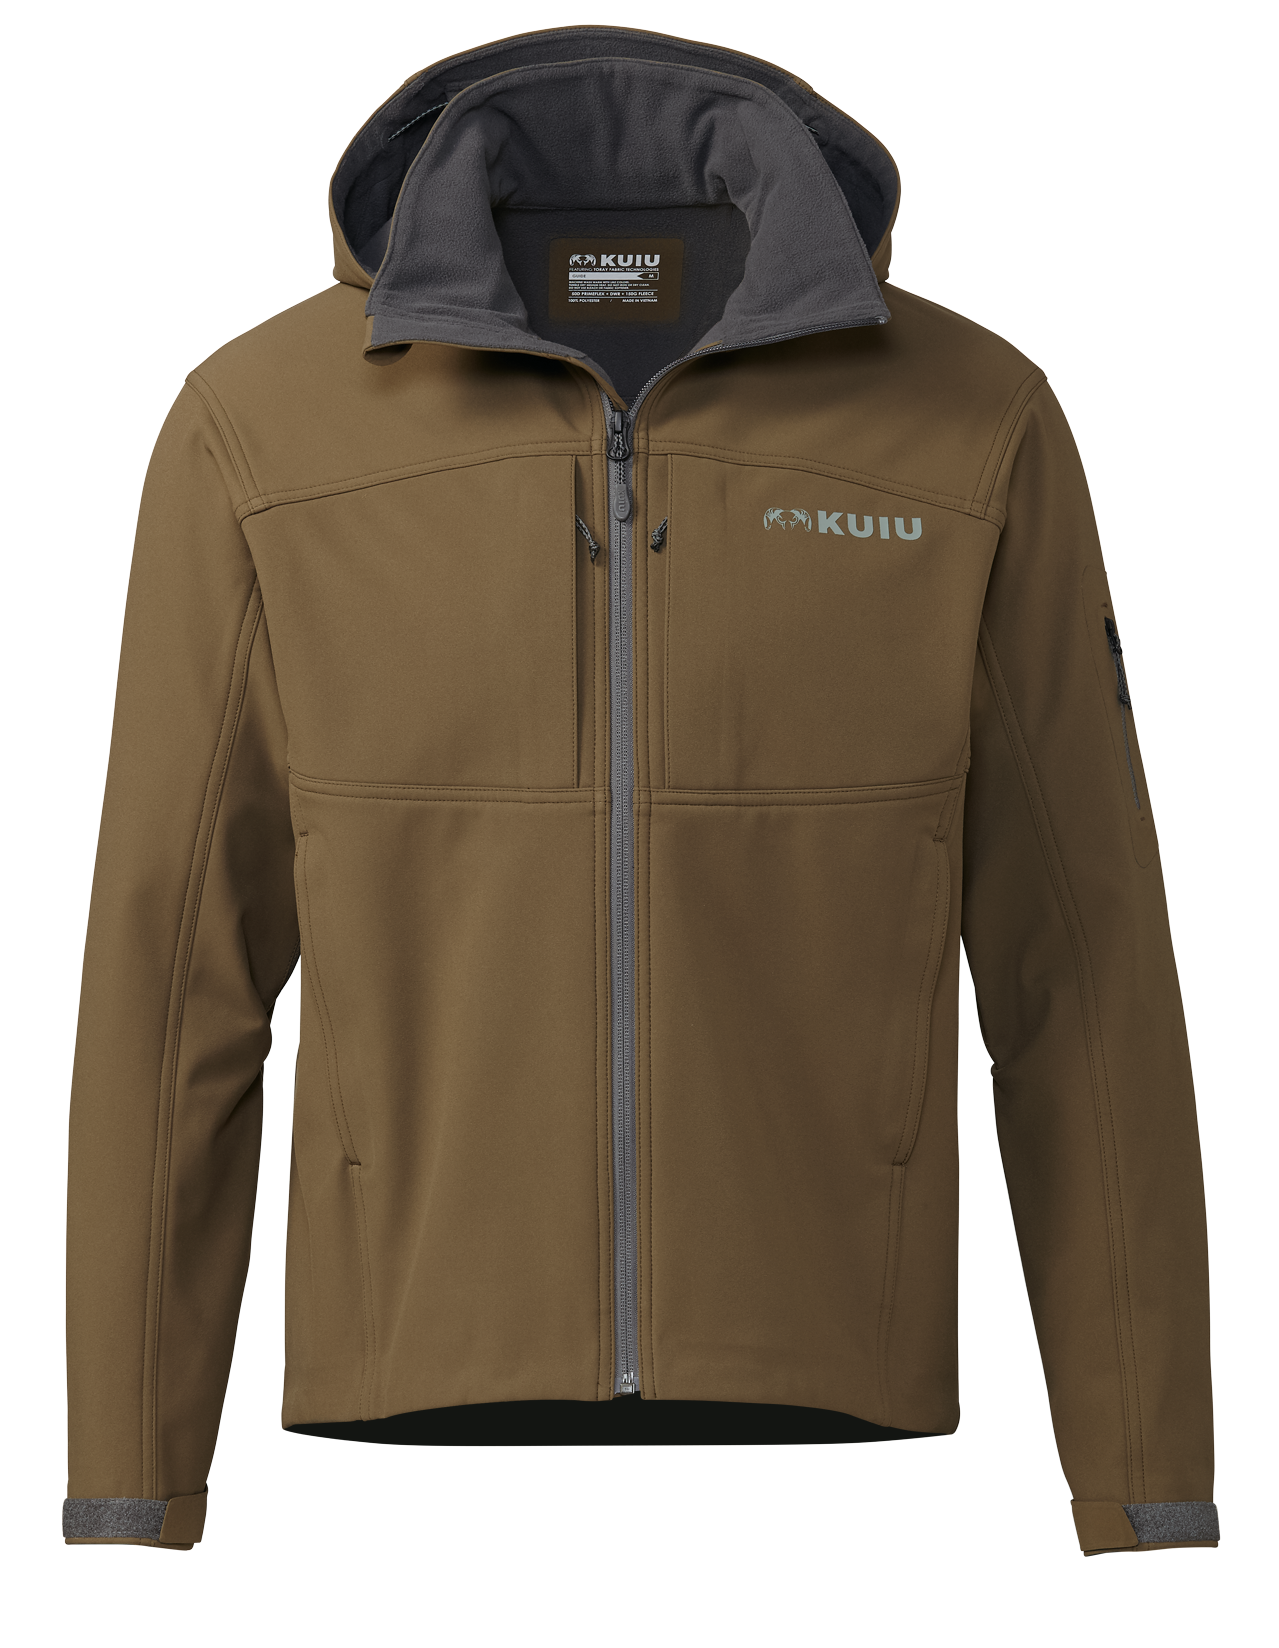 KUIU Guide DCS Hunting Jacket in Bourbon | Size Large